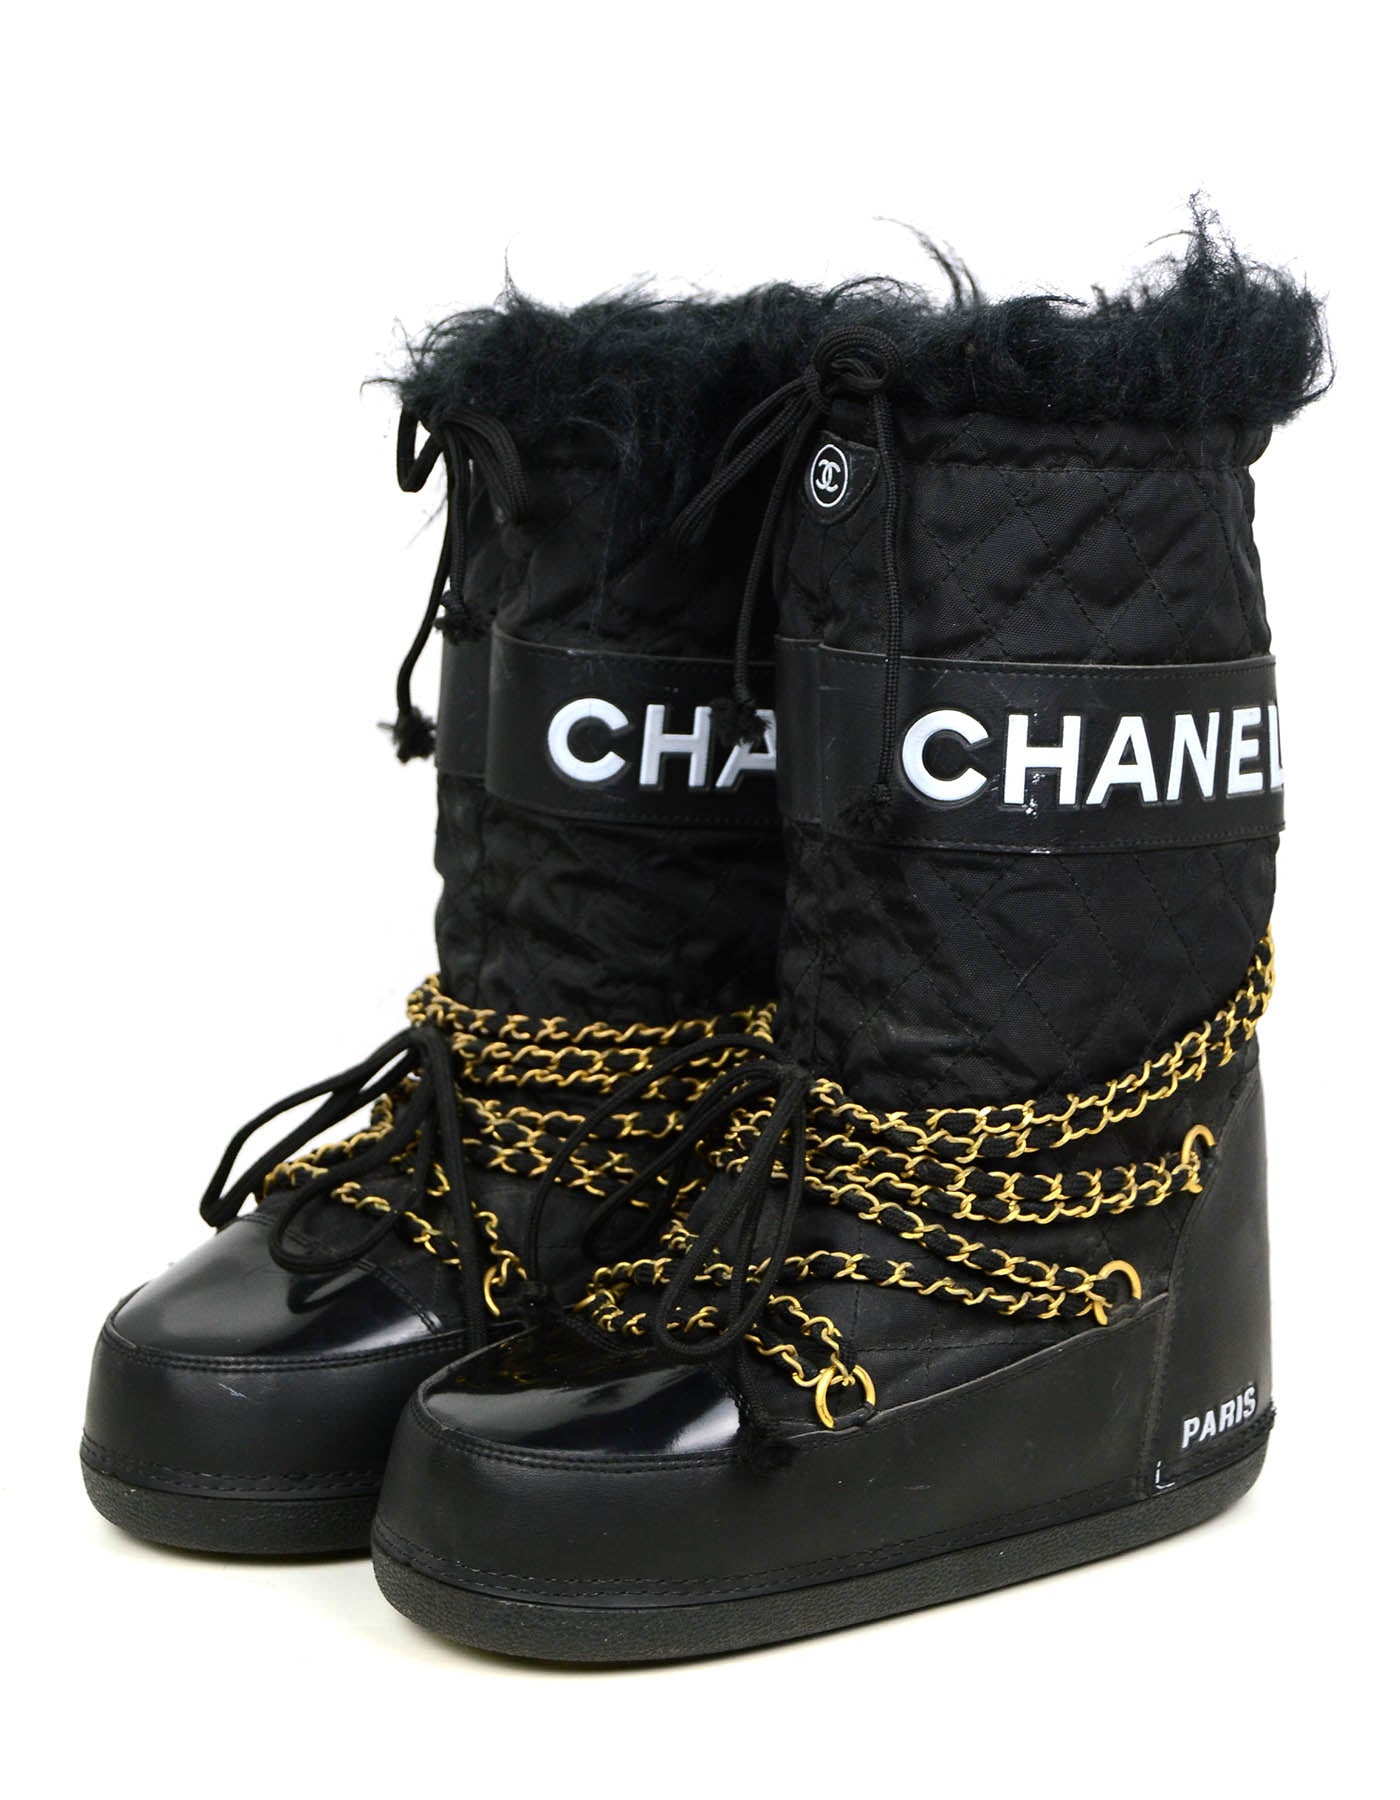 Chanel moon boot  Chanel boots Boots Fashion shoes